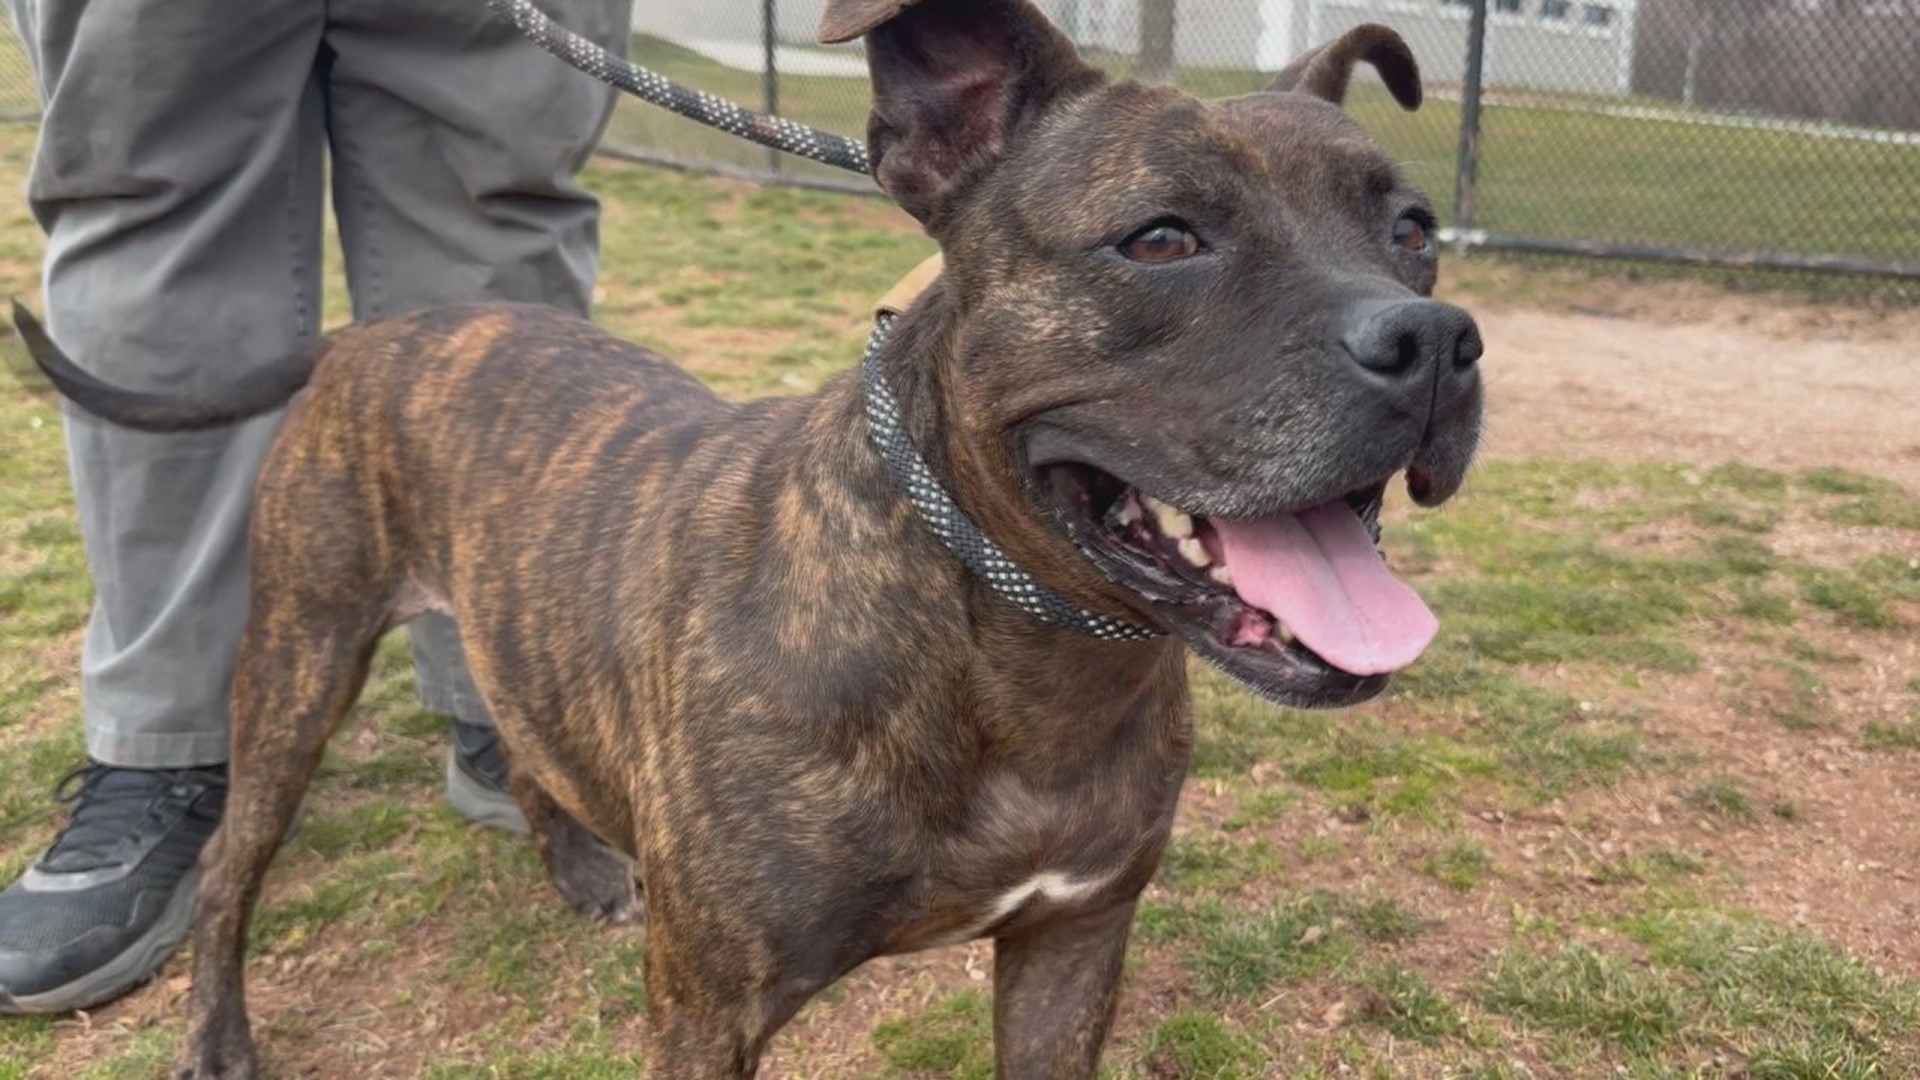 Skip the flowers and chocolate this Valentine's Day, Roxi is looking for milk bones, belly rubs, and a forever family.